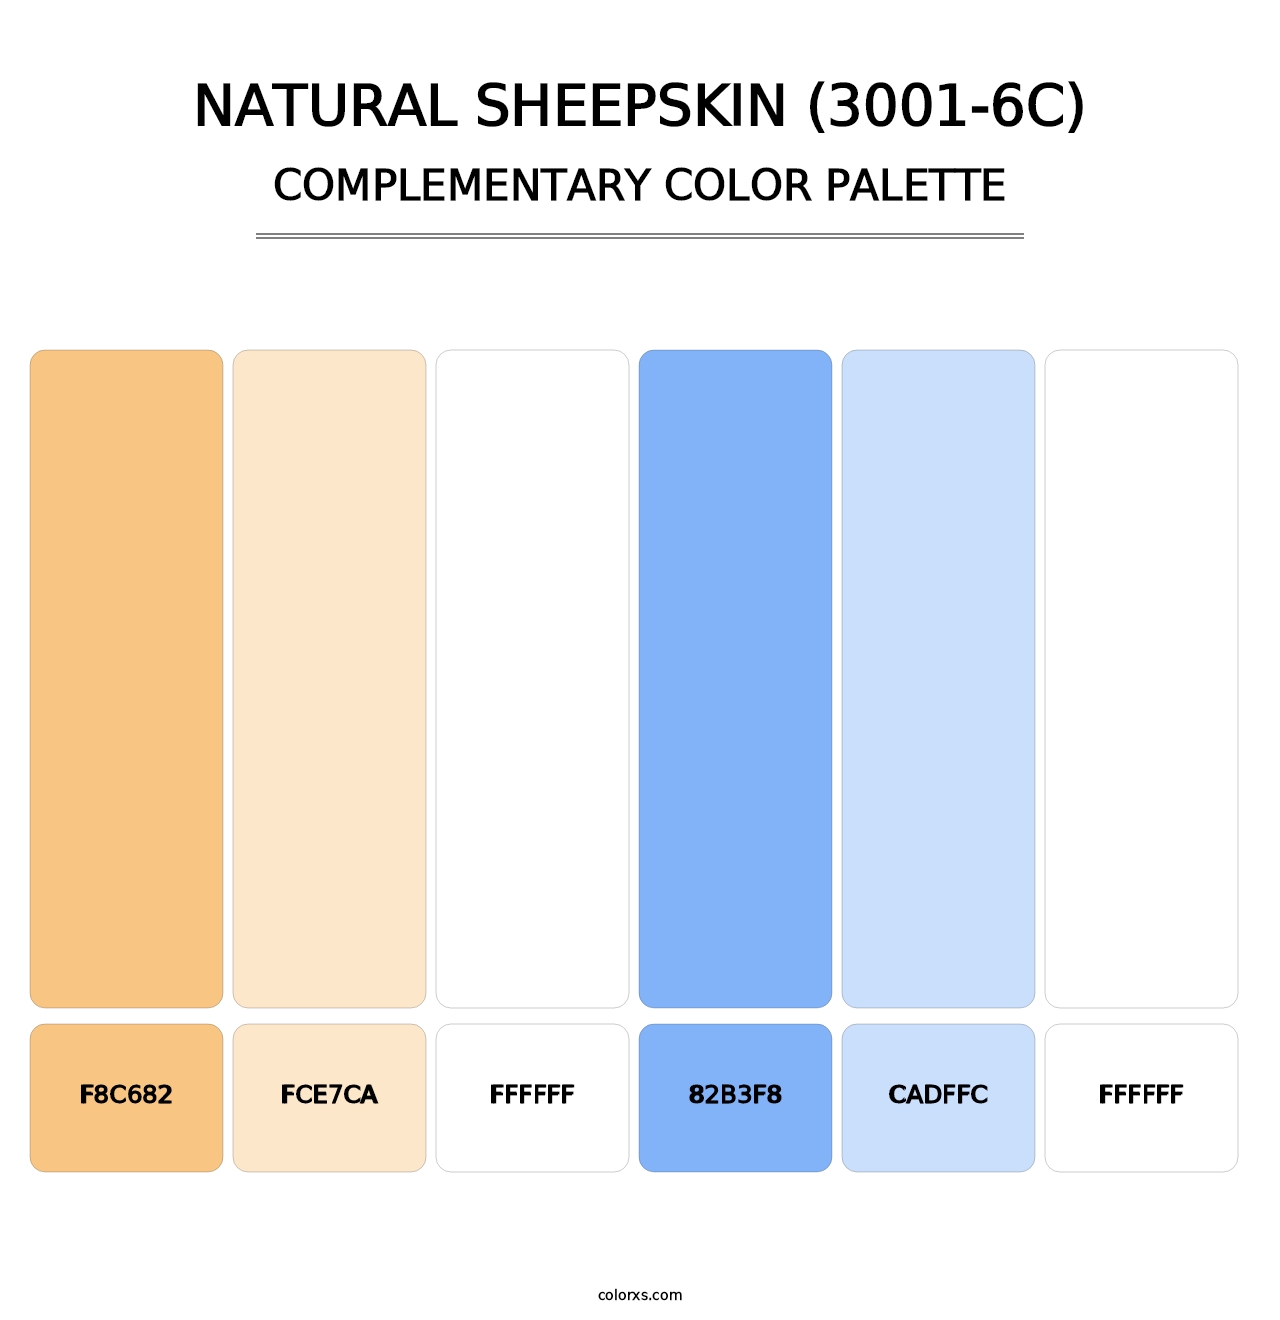 Natural Sheepskin (3001-6C) - Complementary Color Palette